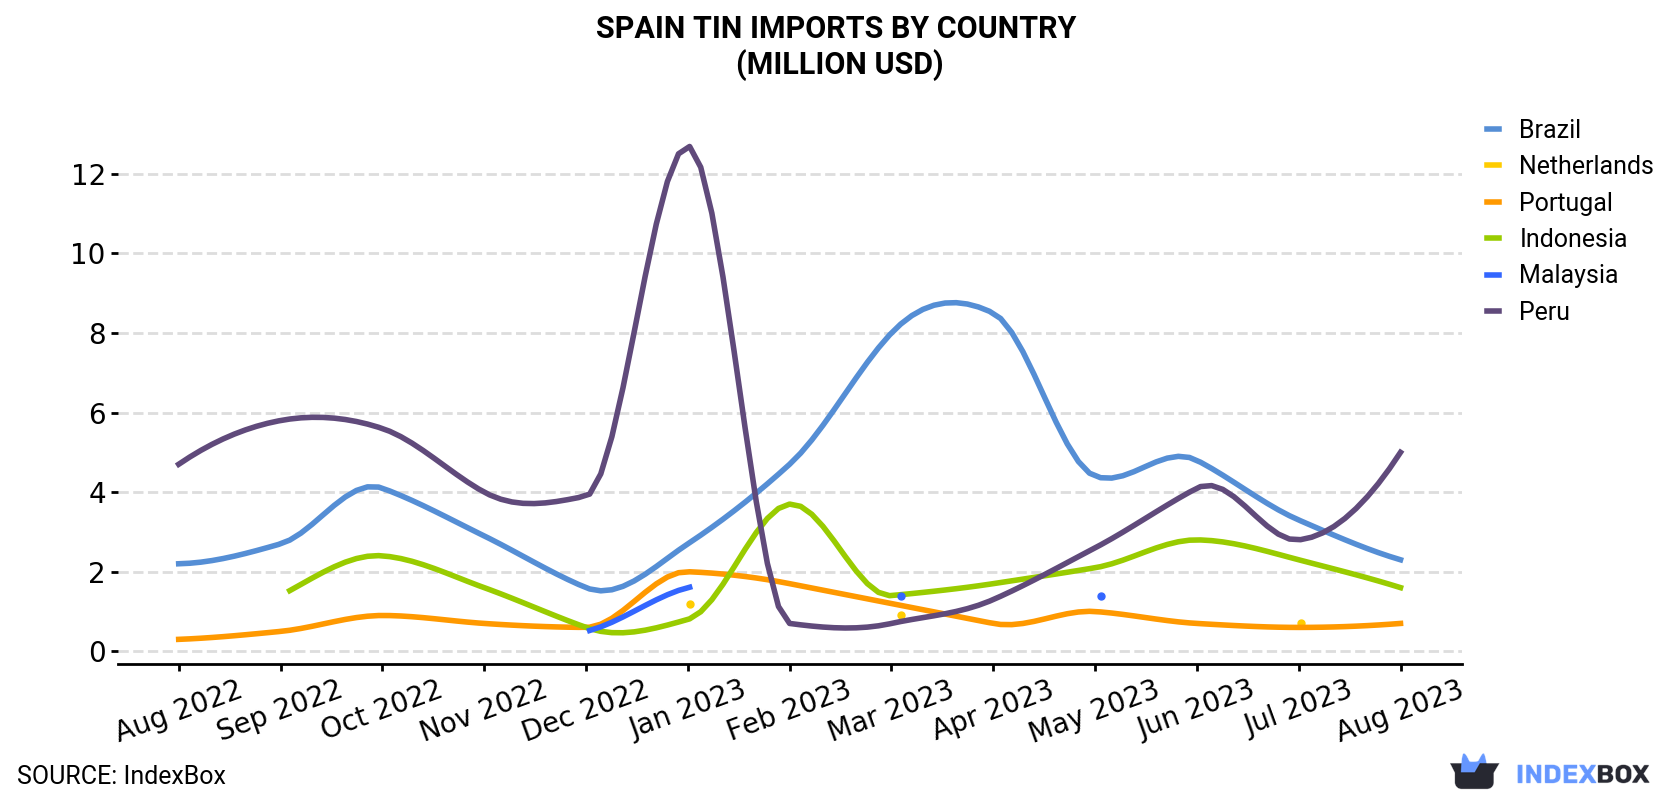 Spain Tin Imports By Country (Million USD)